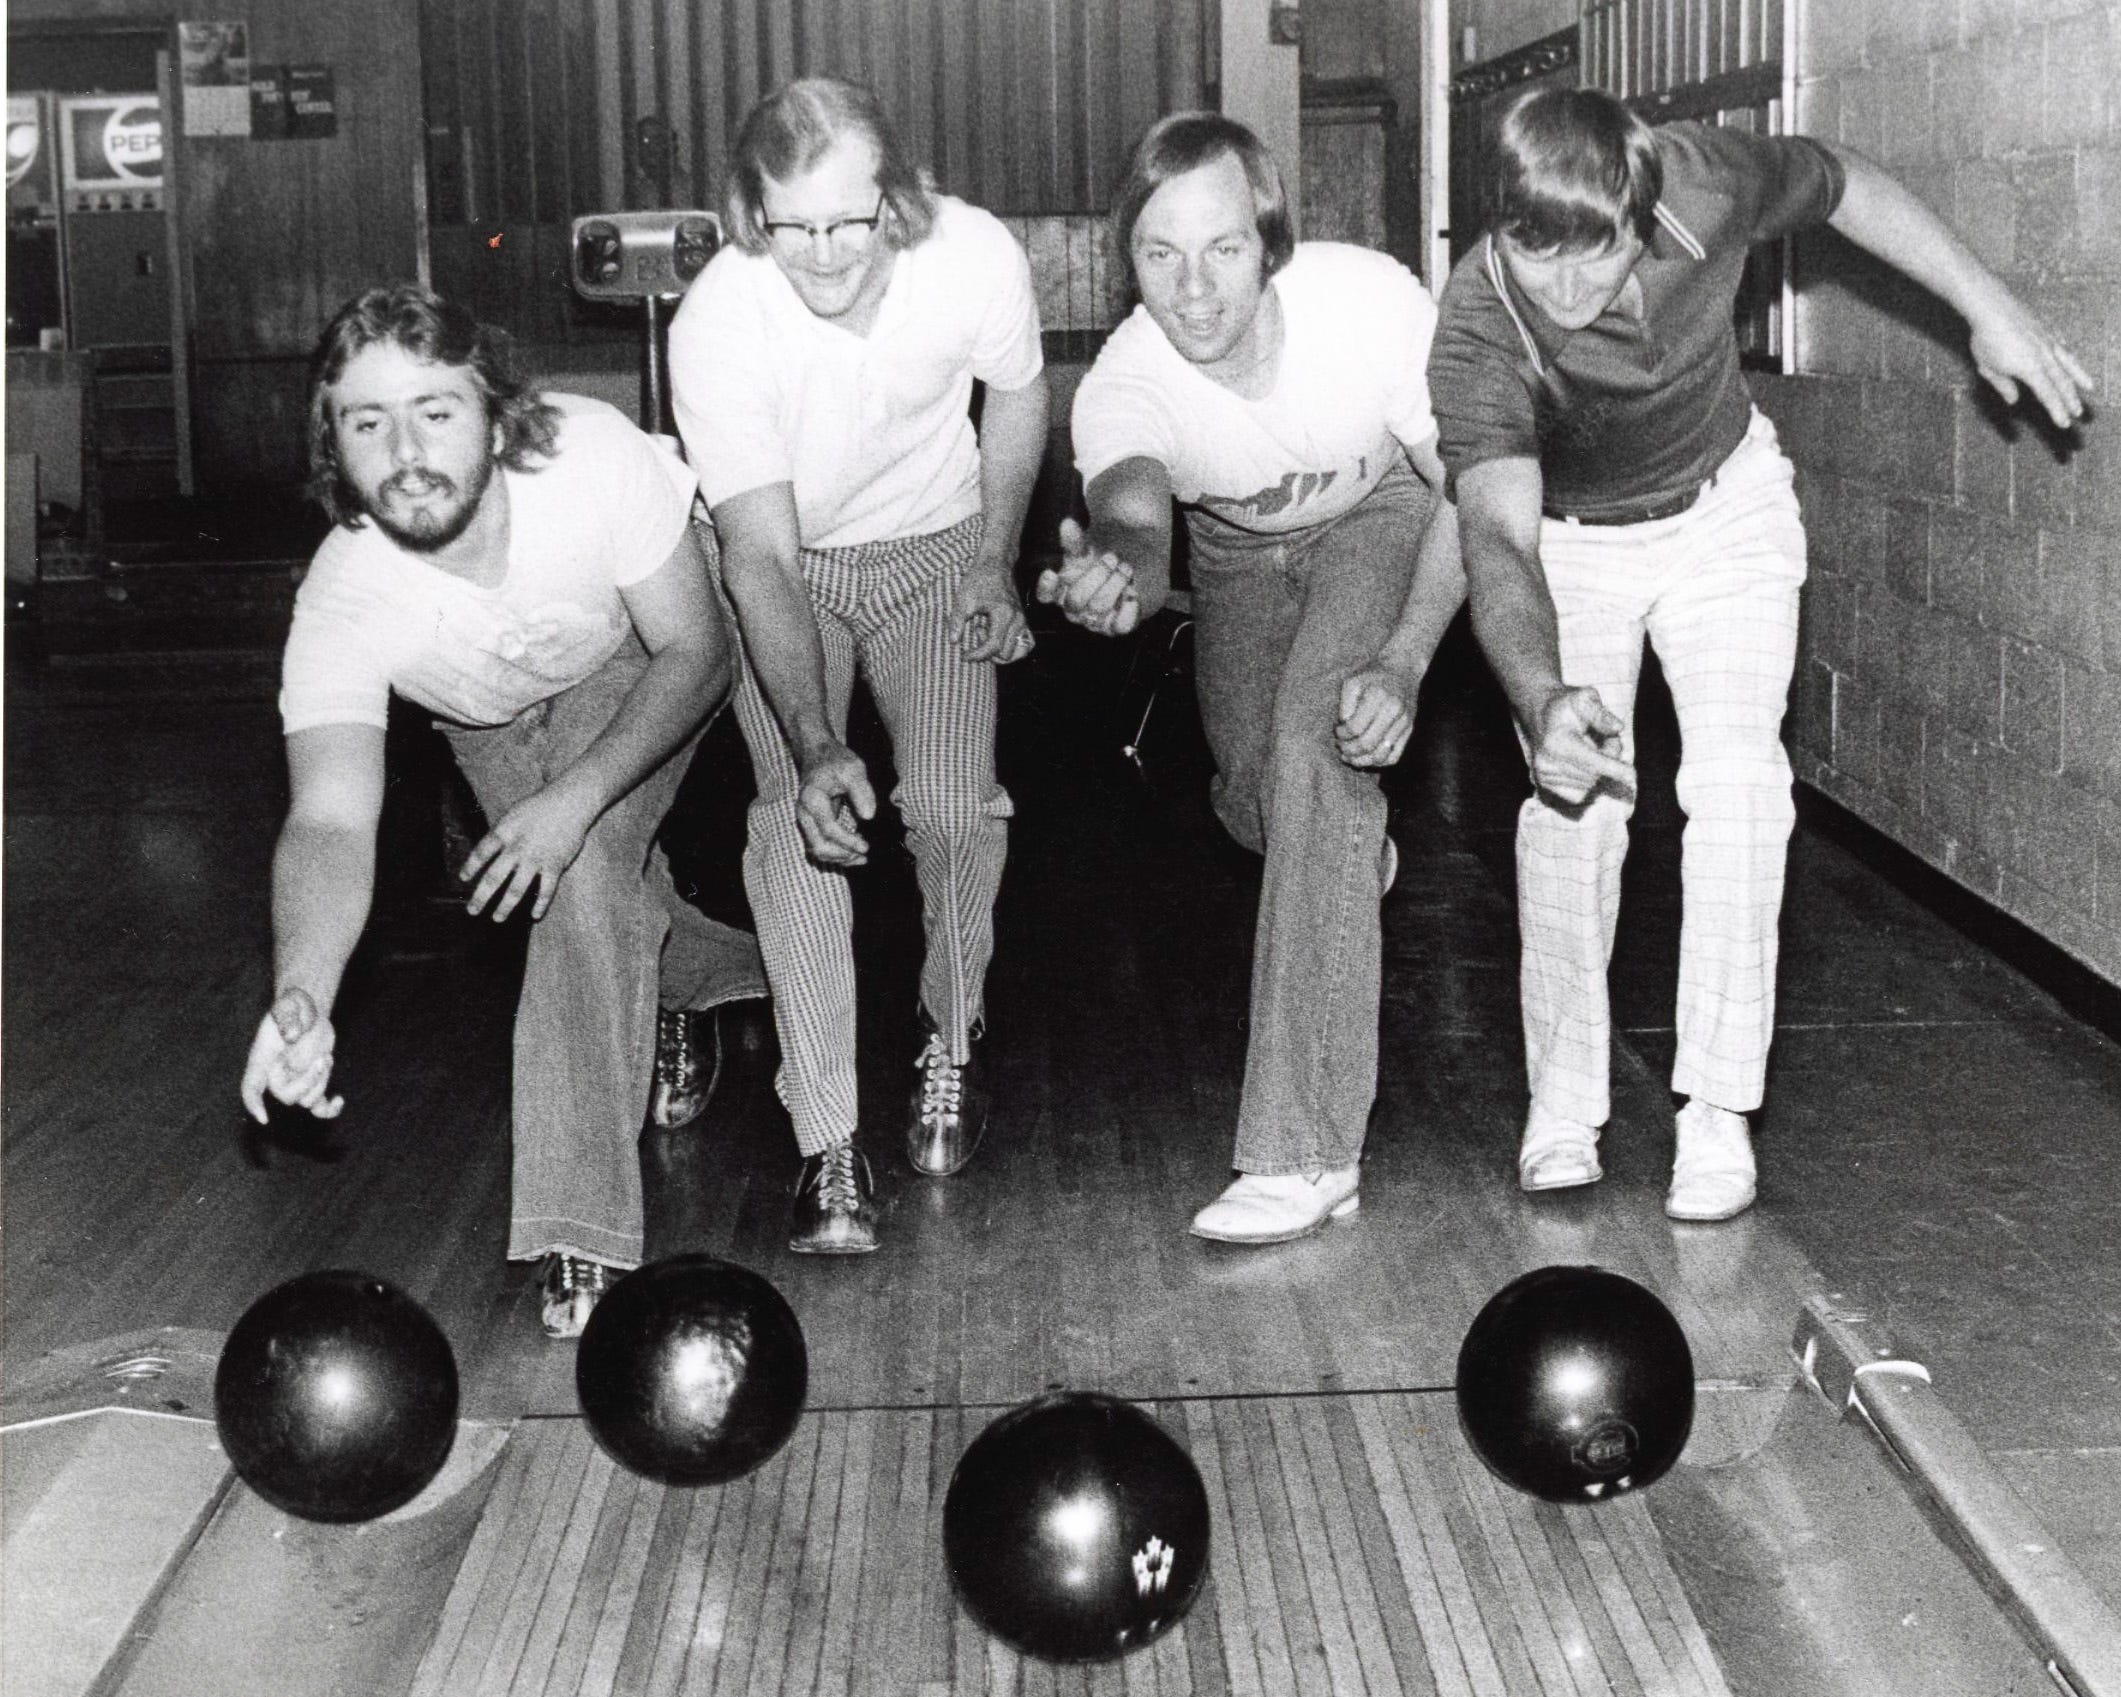 Bowling in Knoxville through the years